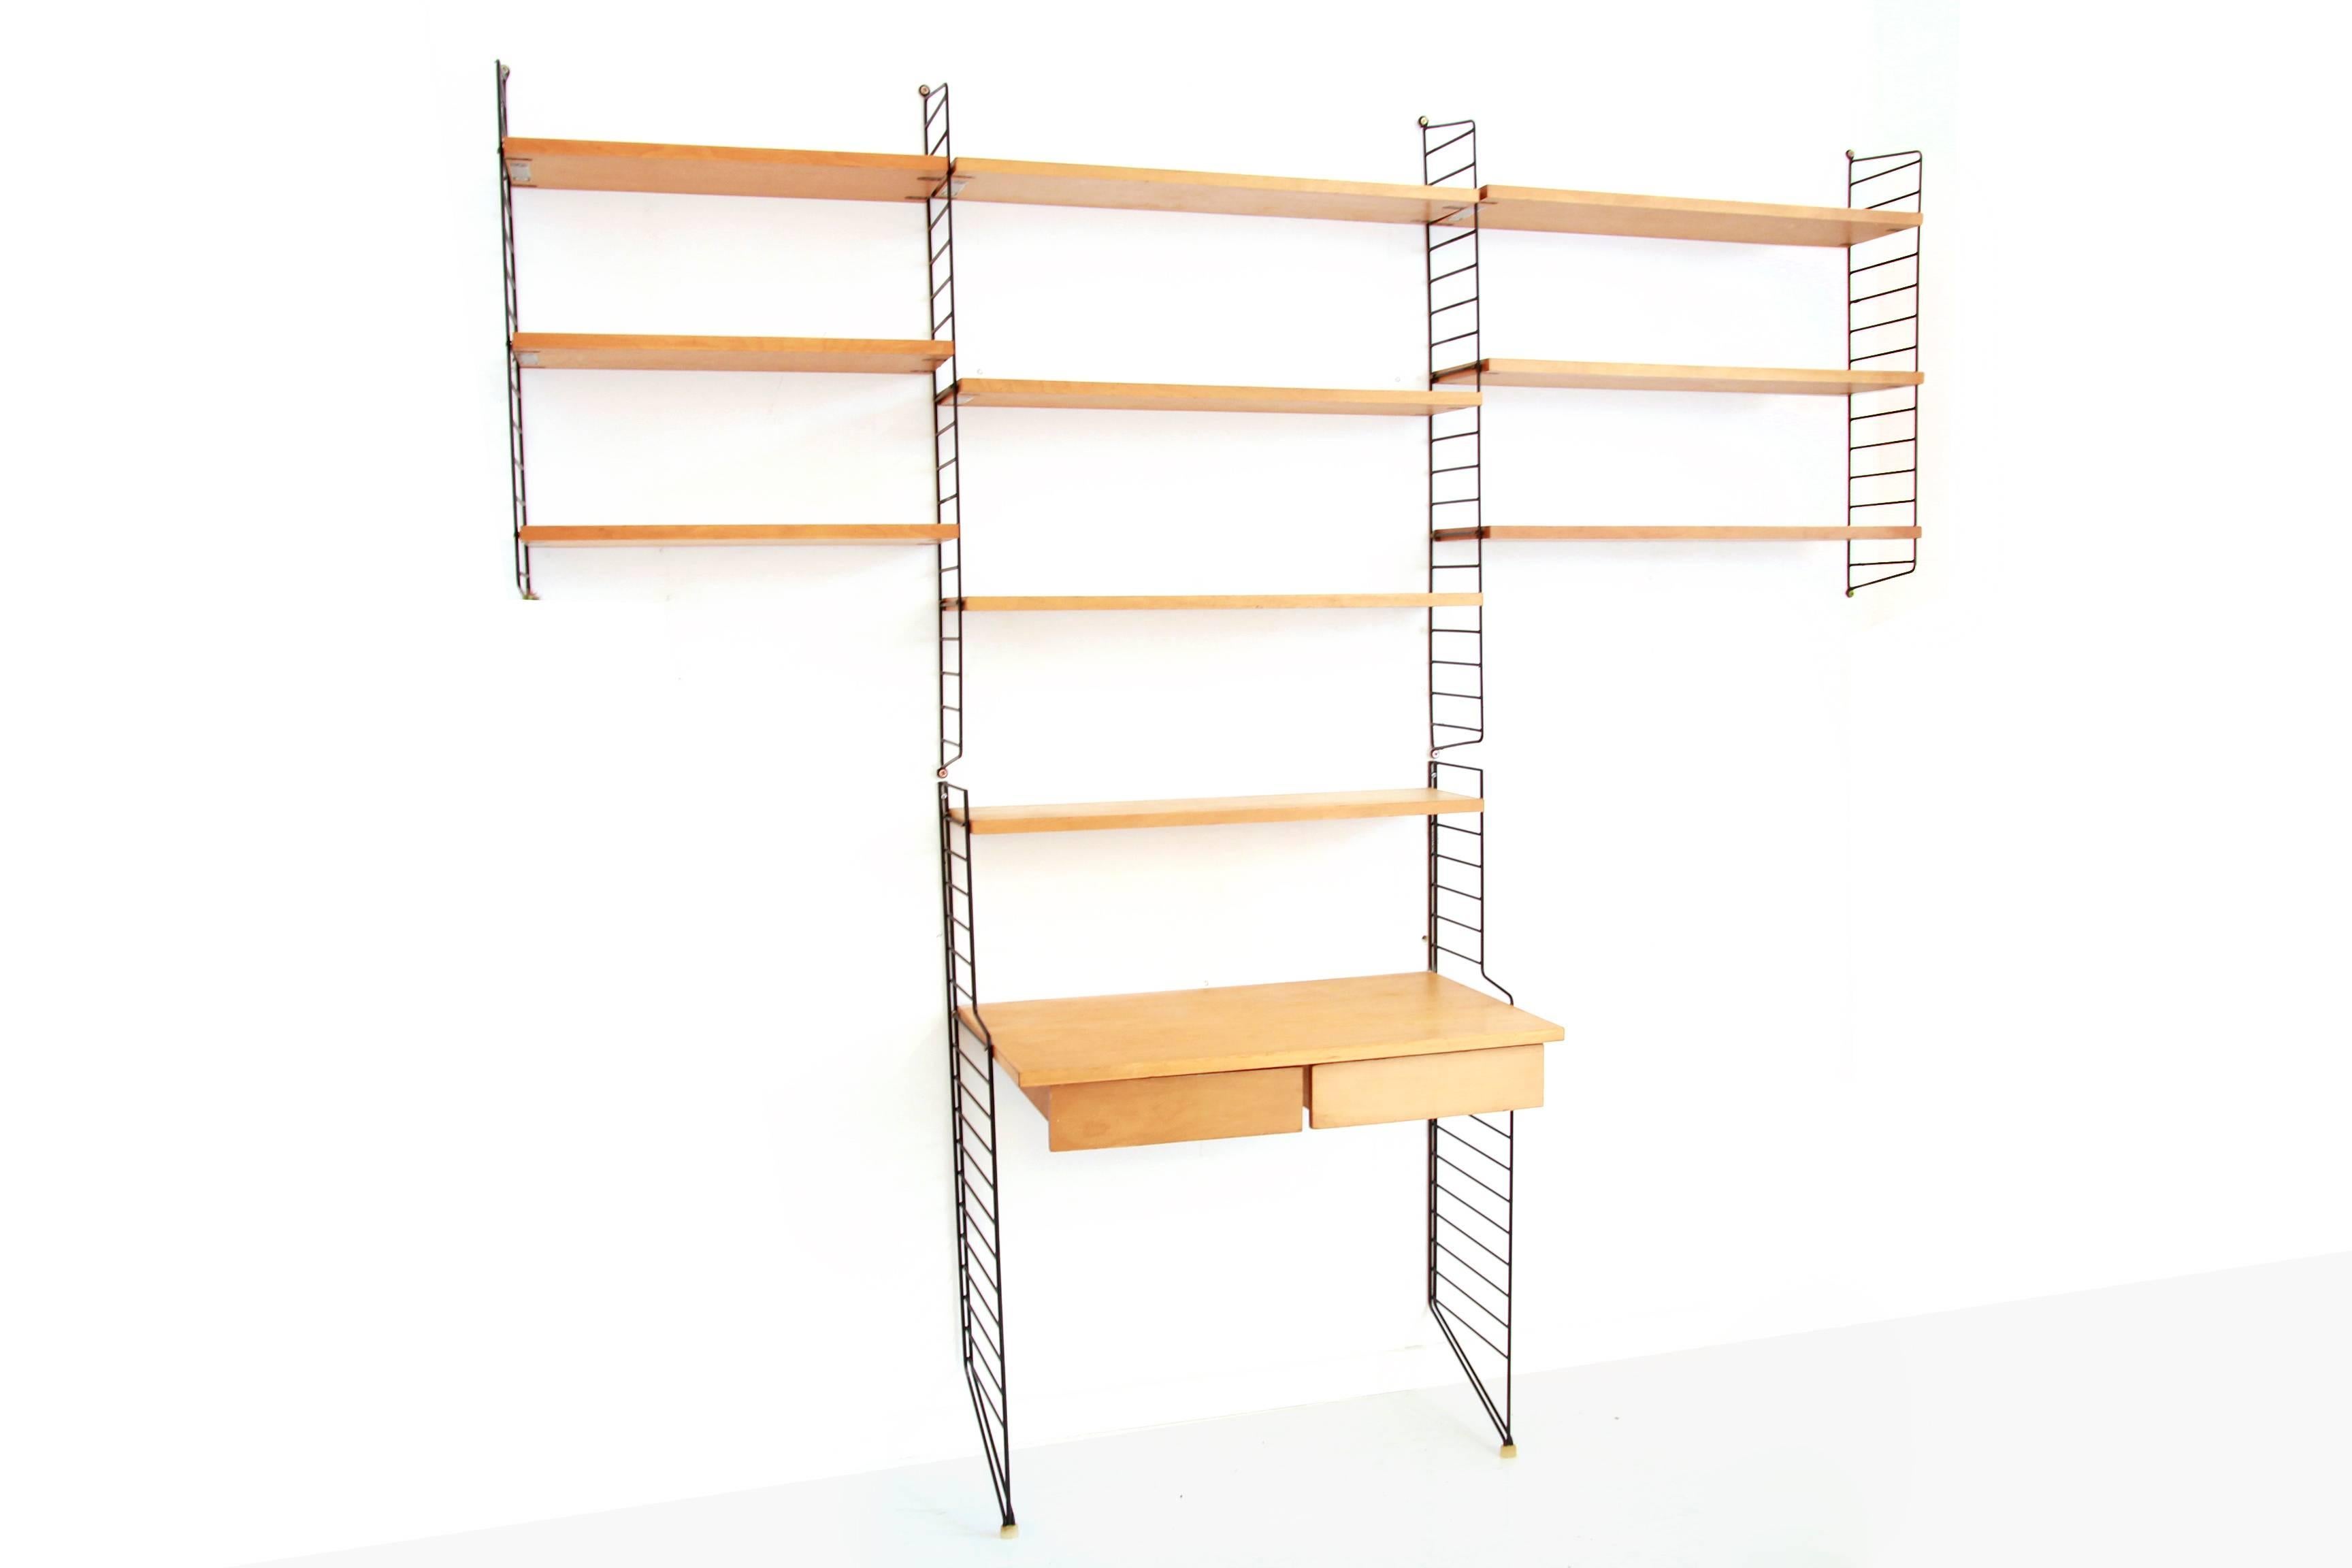 Beautiful string design wall system from Nisse Strinning in pine. Bokhyllan ’the ladder shelf’.
This set consists of four black ladders that can be hung on the wall and two black ladders that support on the floor, seven shelves of 78 cm wide and